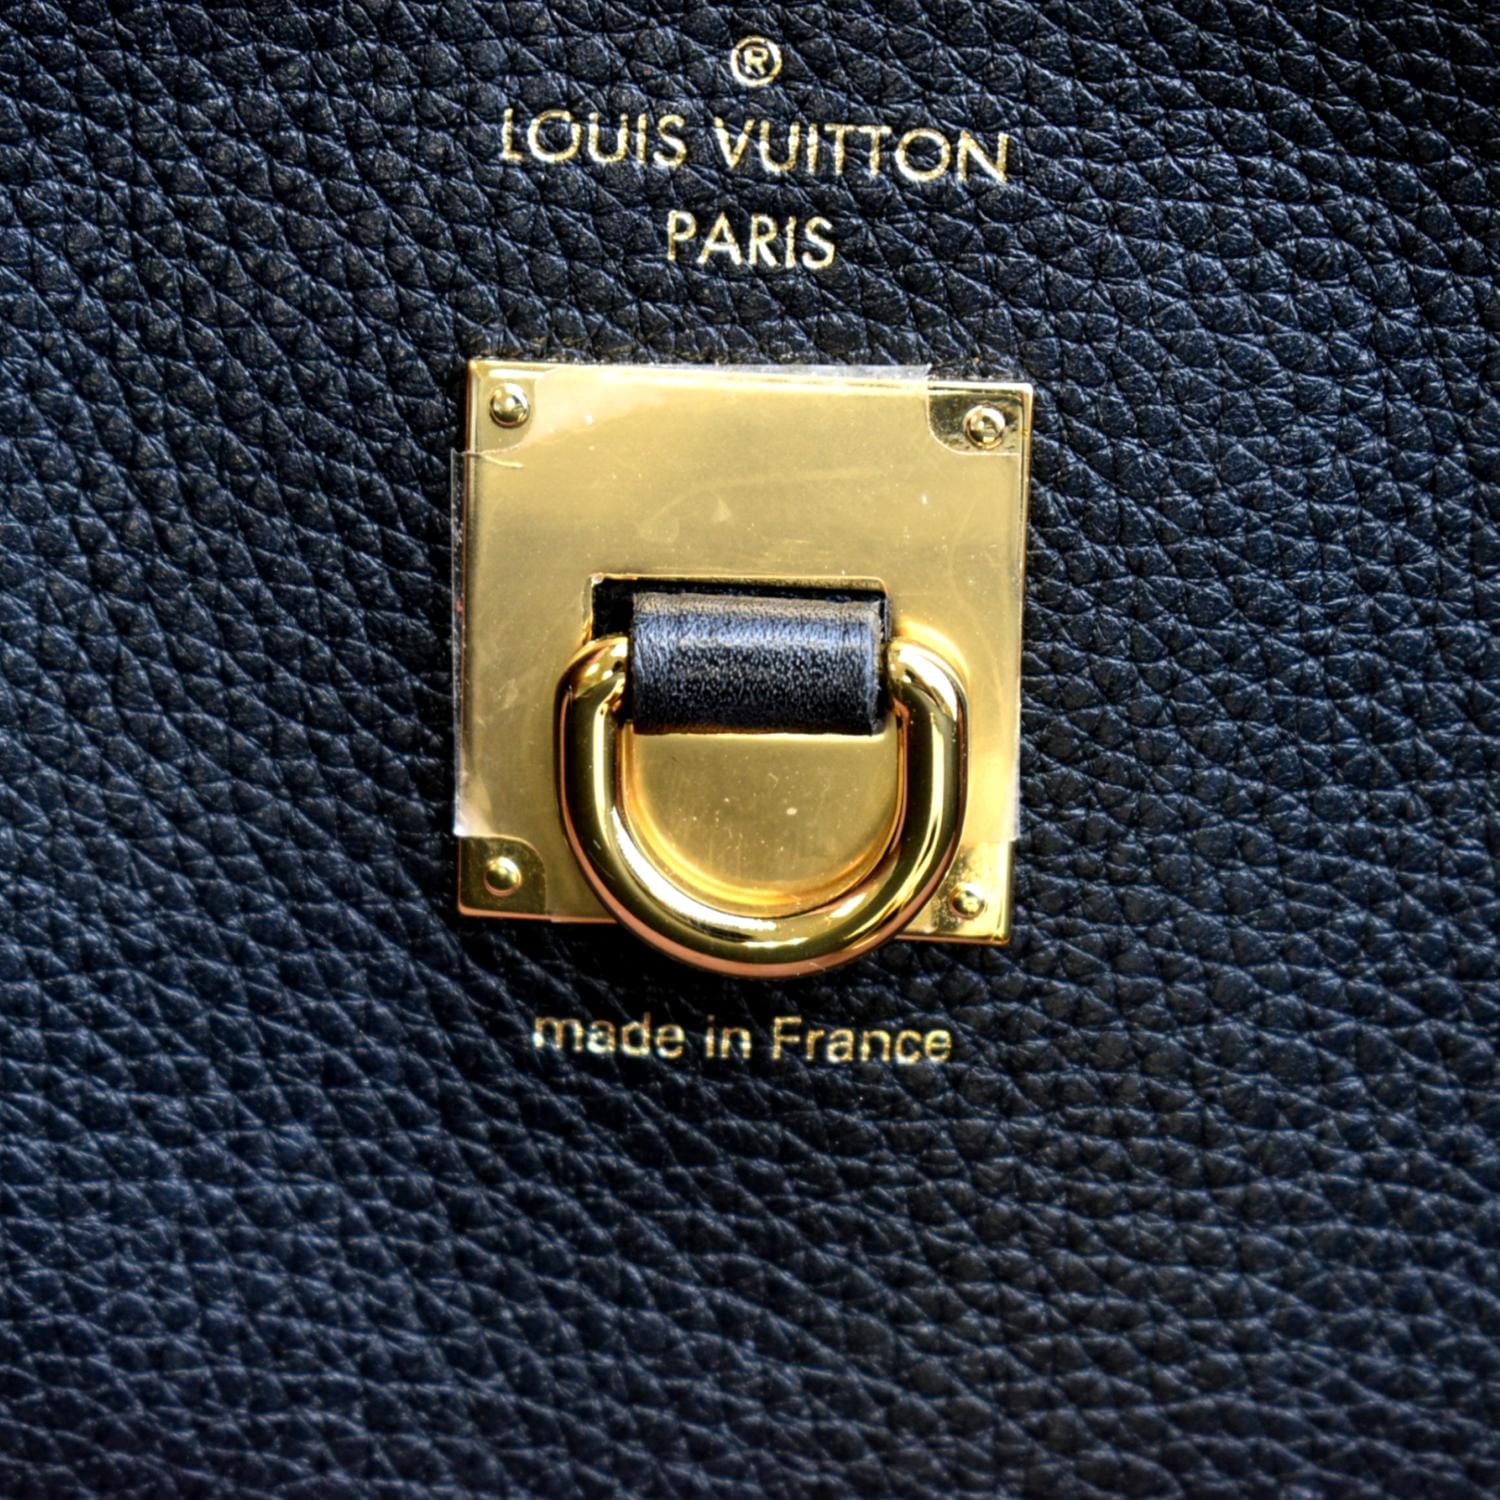 genuine leather louis vuitton bags